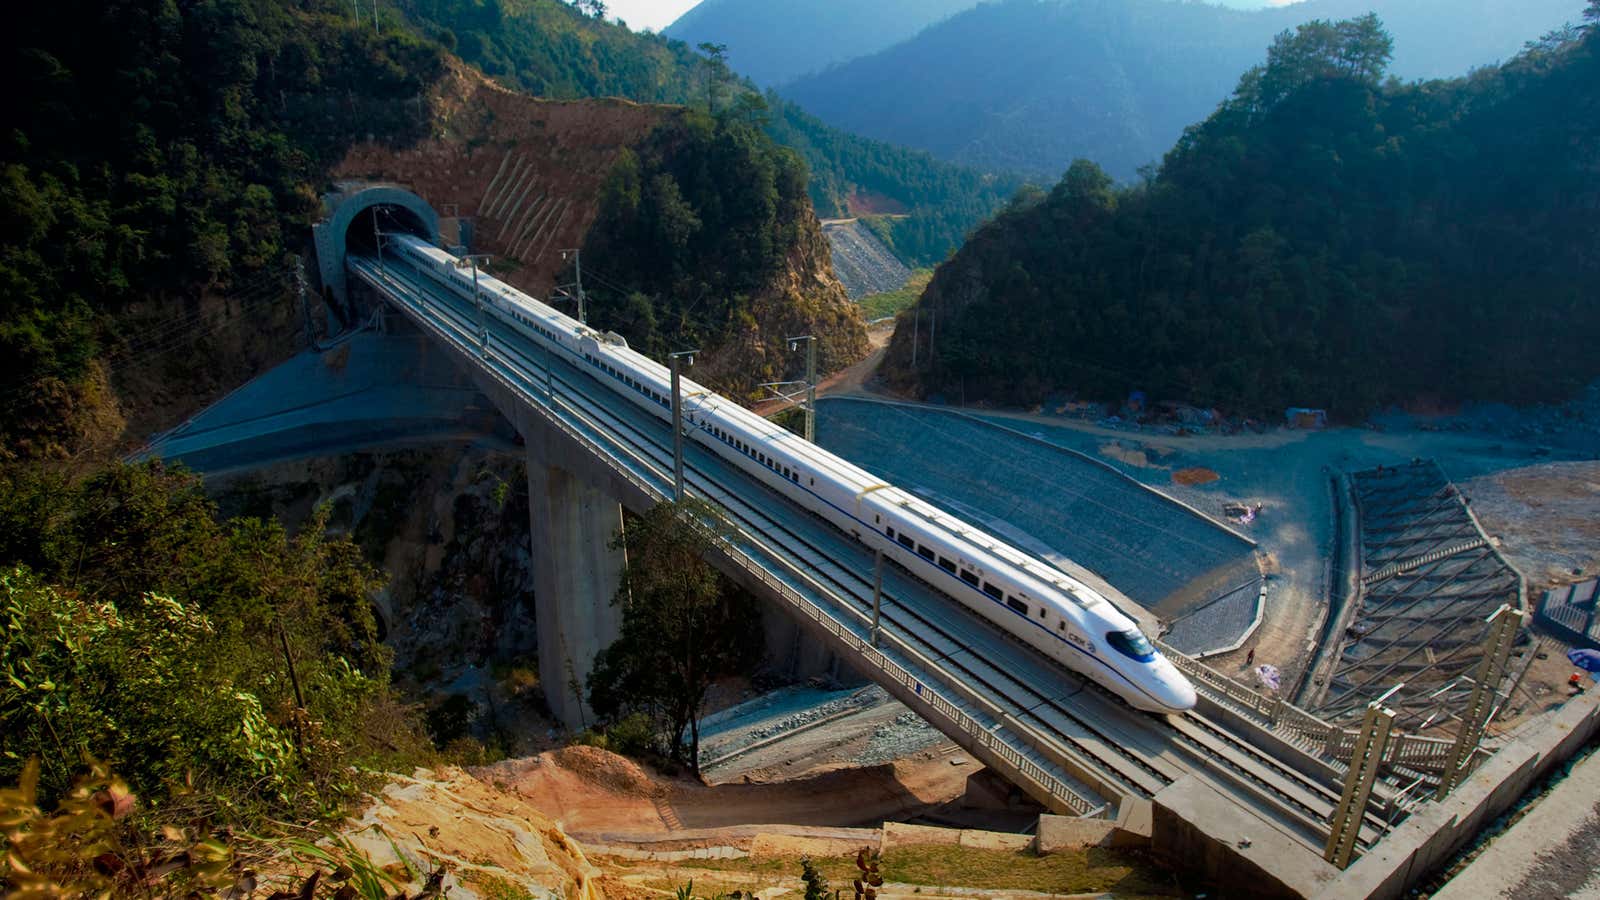 Amtrak is trying to catch up to China’s high speeds.